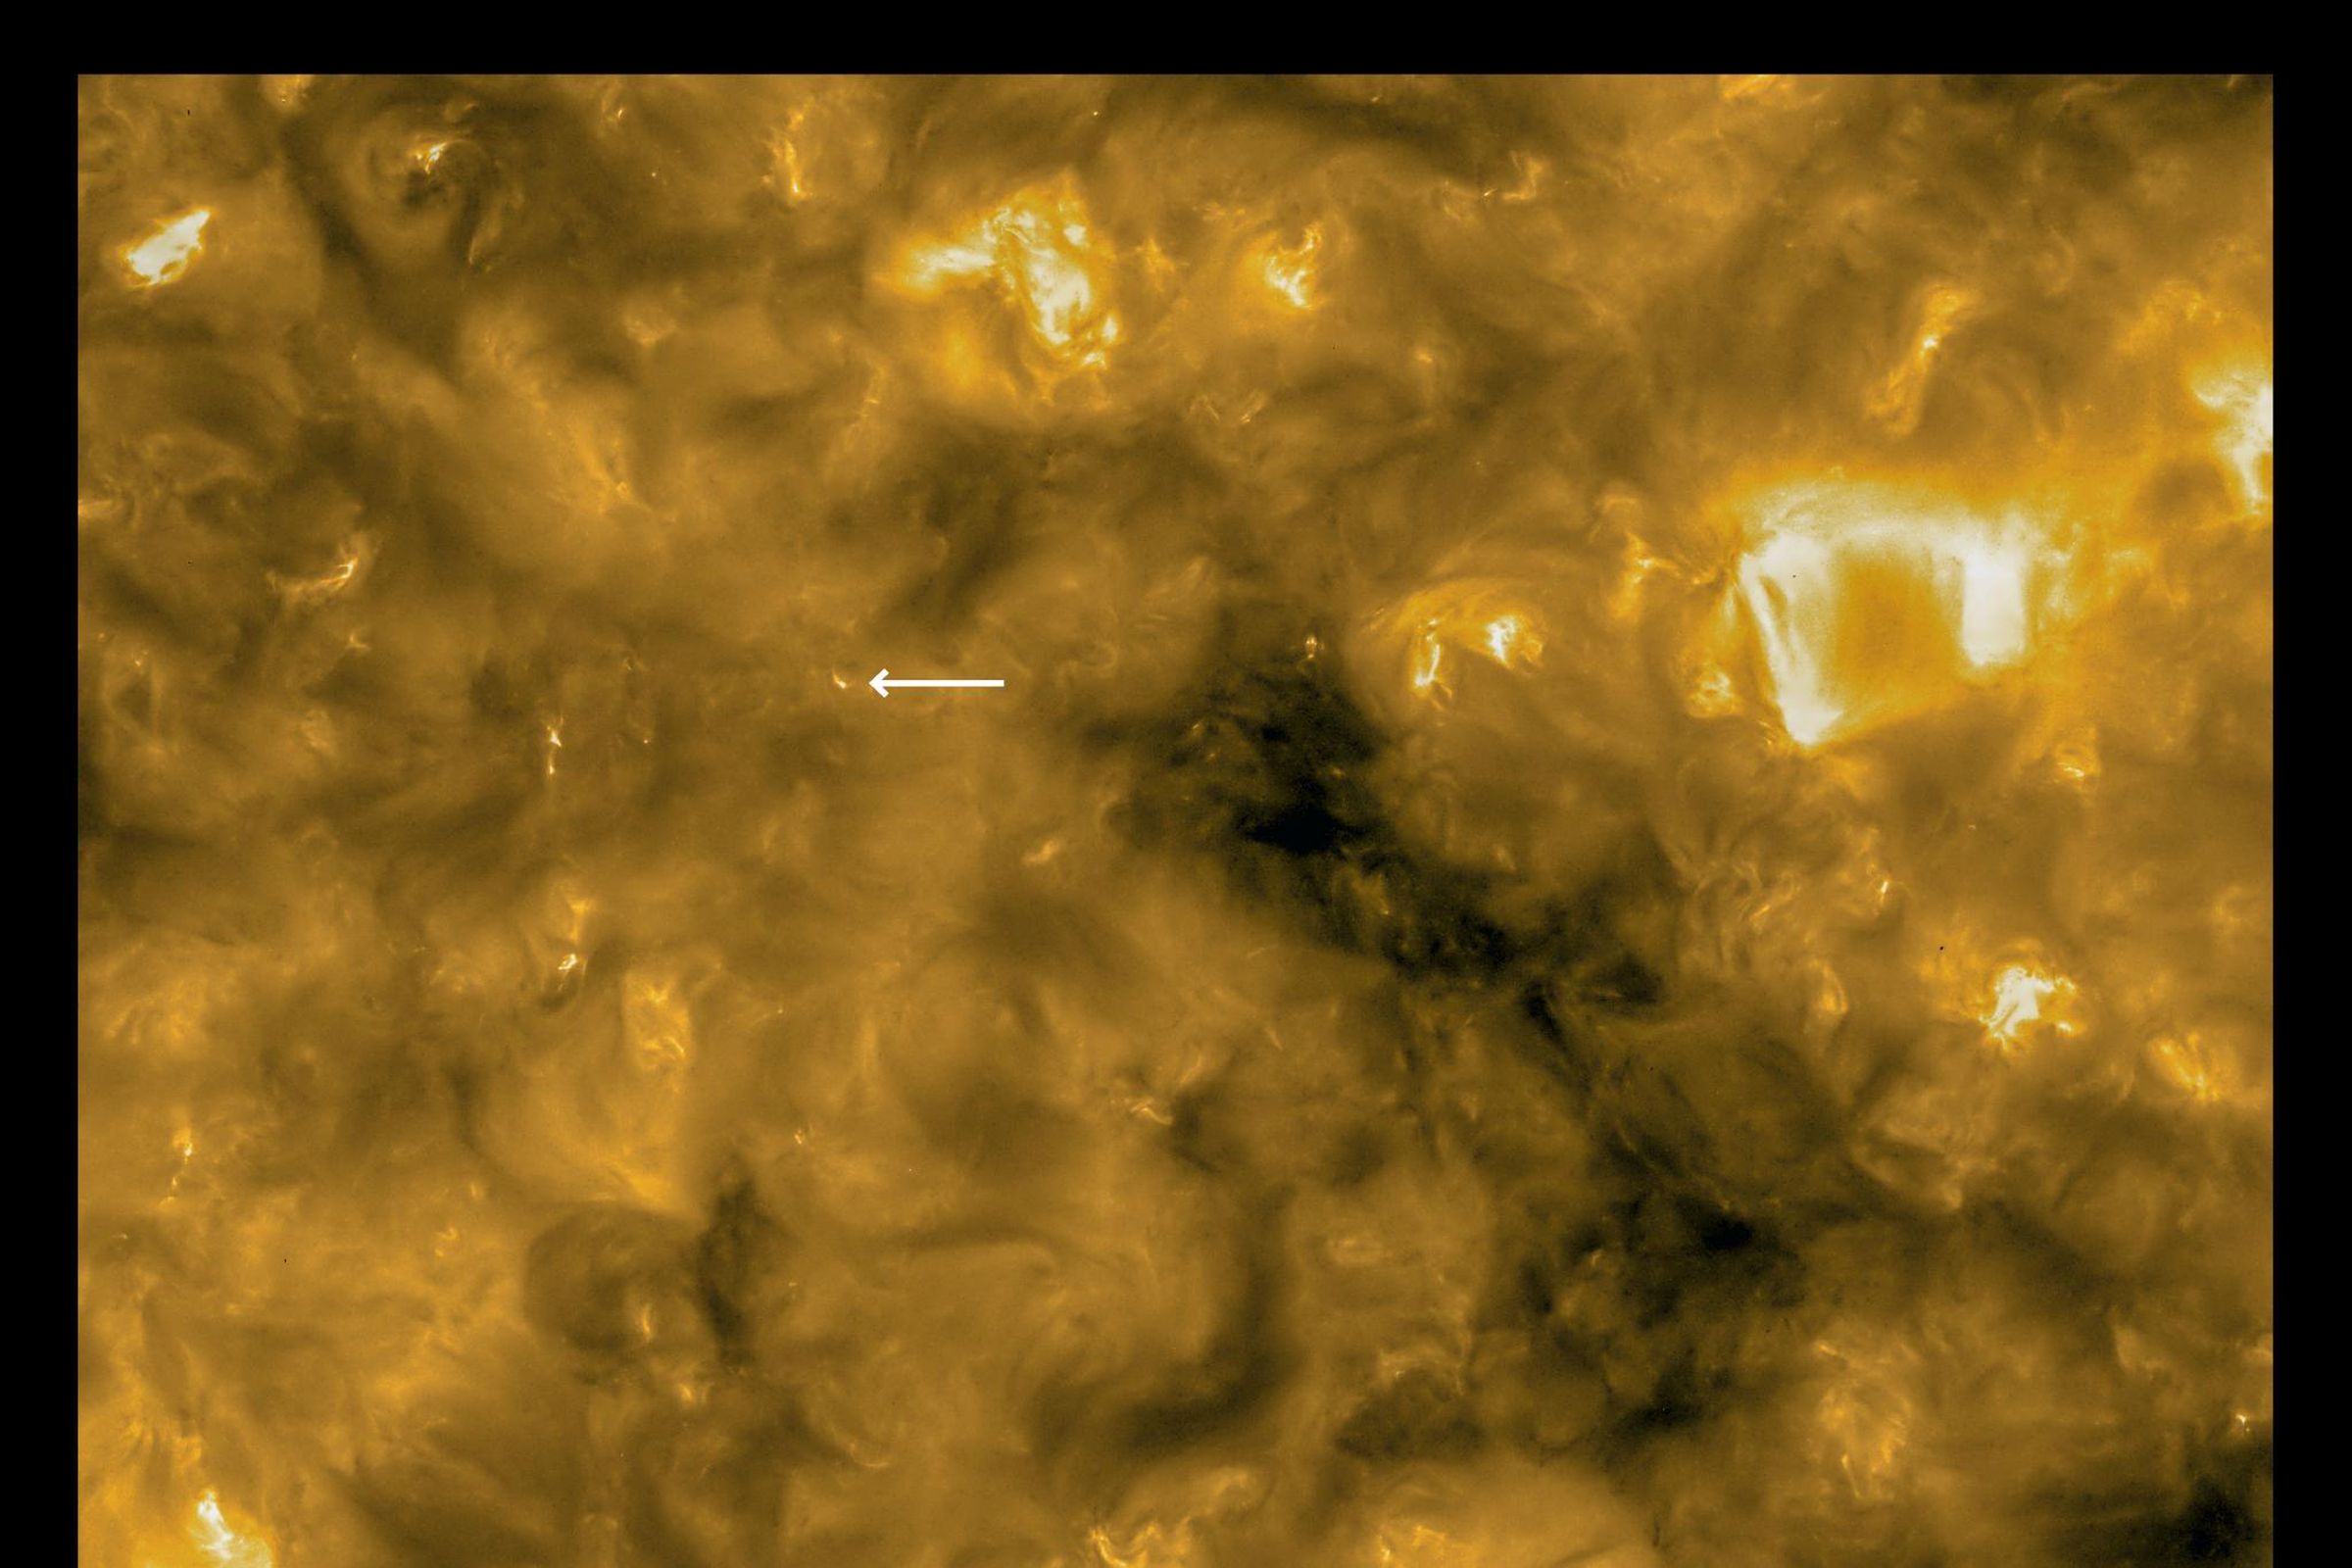 A high-resolution image from Solar Orbiter, with an arrow pointing to one of the campfires